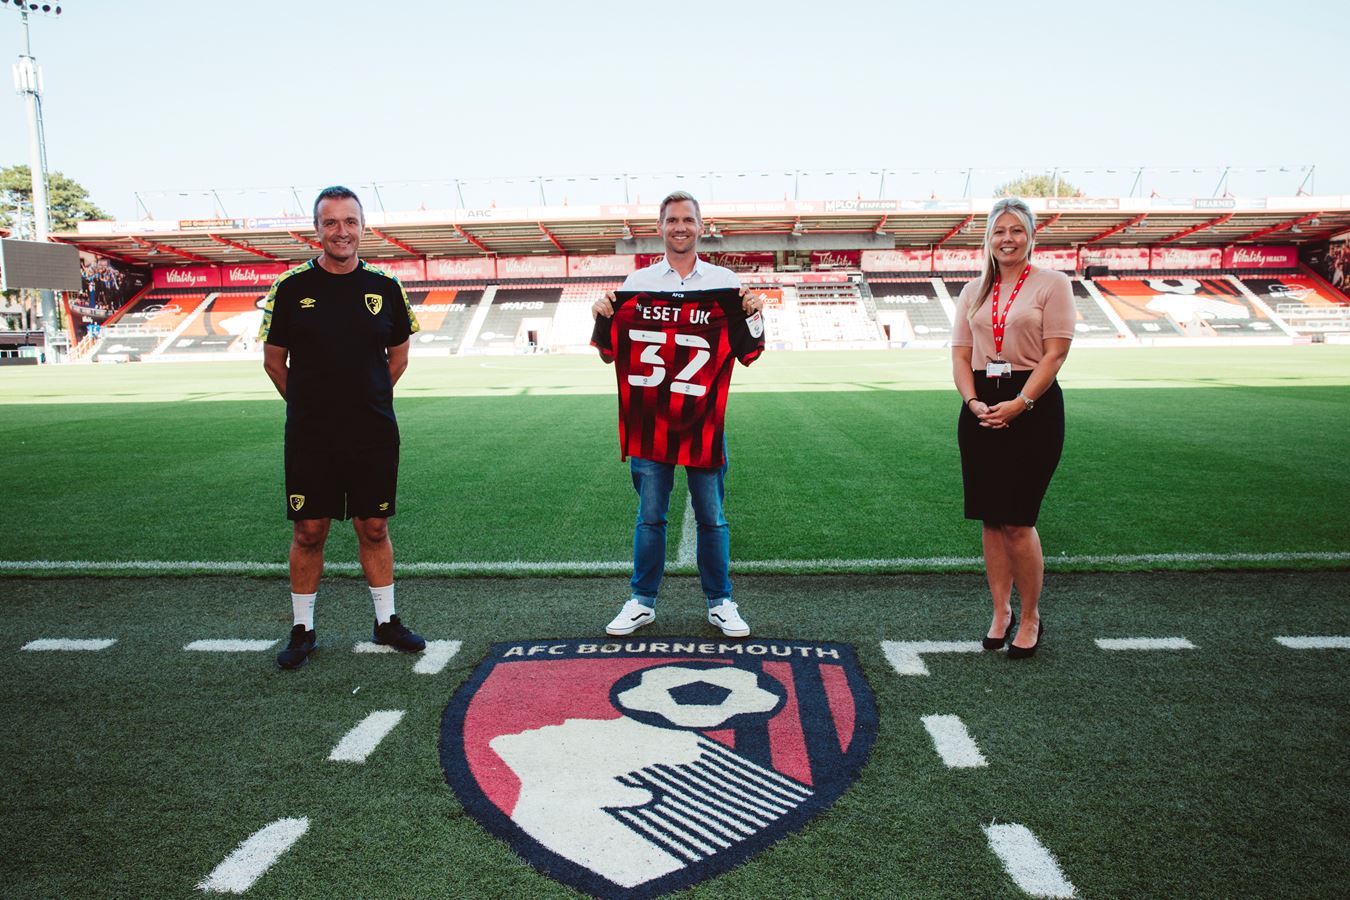 Jake Moore with AFC Bournemouth